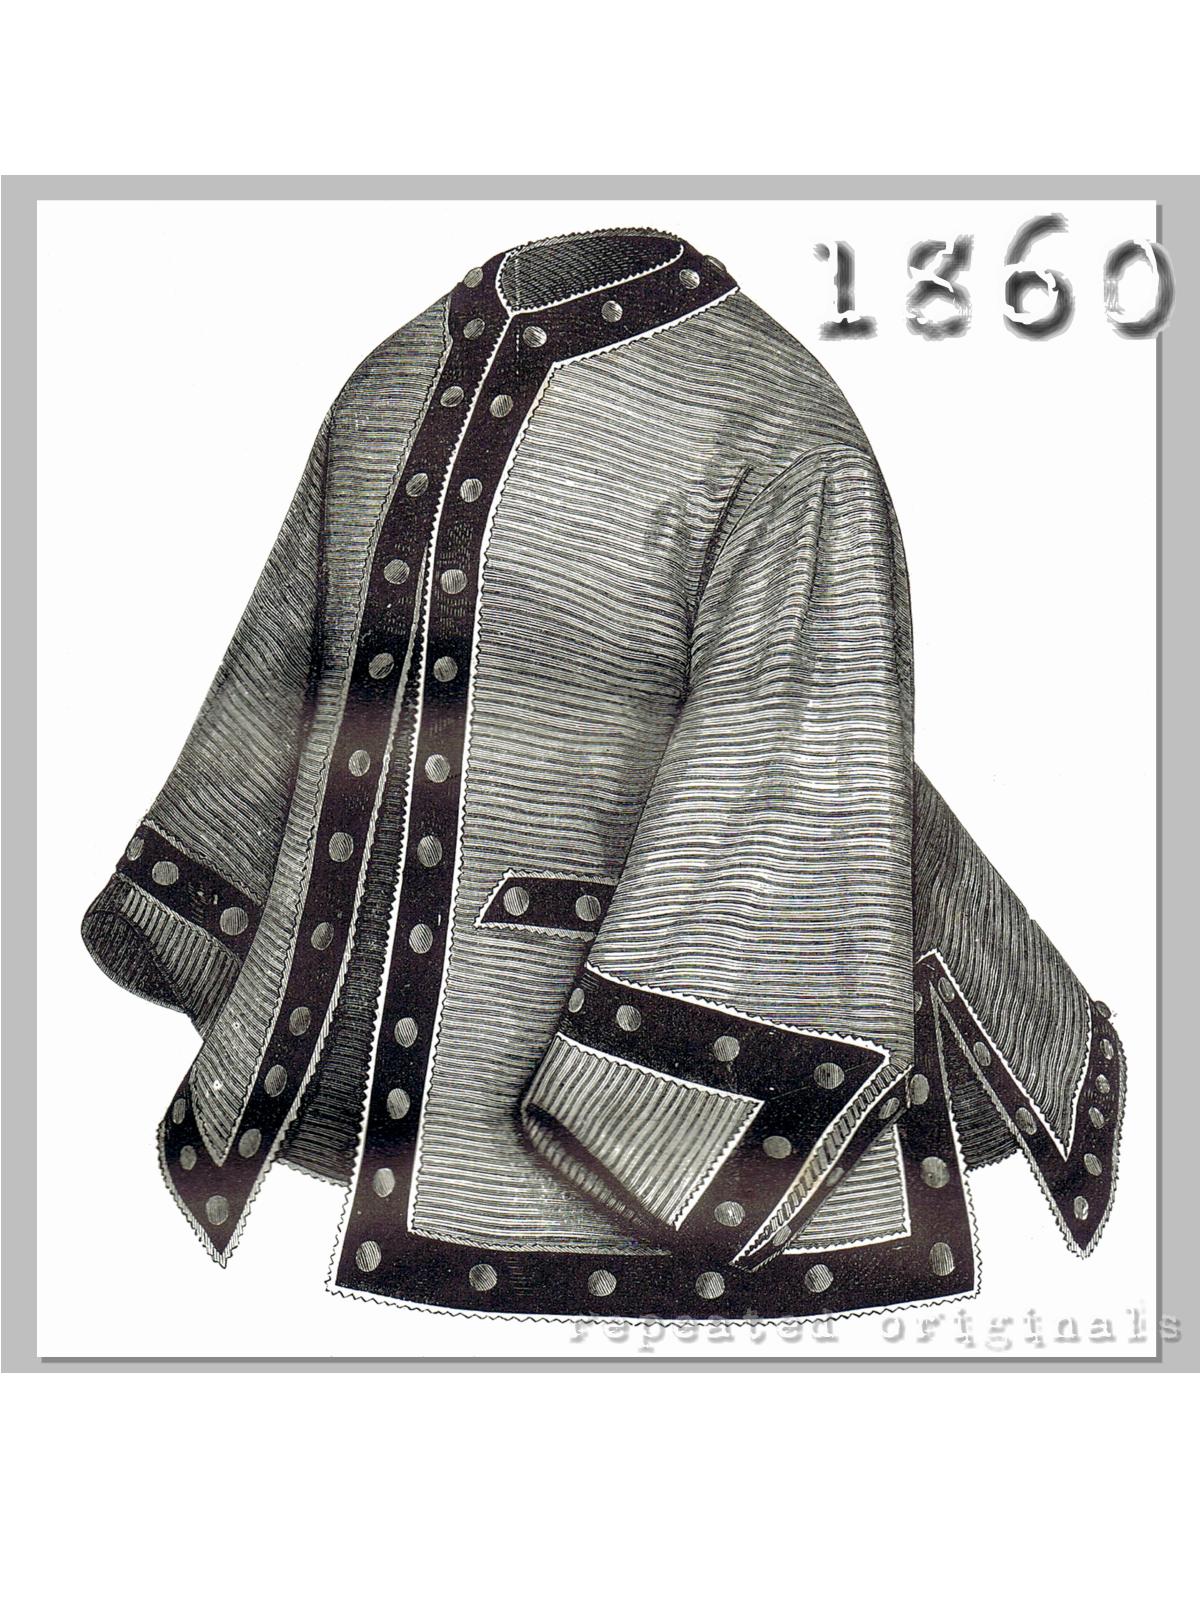 1860 House Jacket Sewing Pattern - INSTANT DOWNLOAD PDF